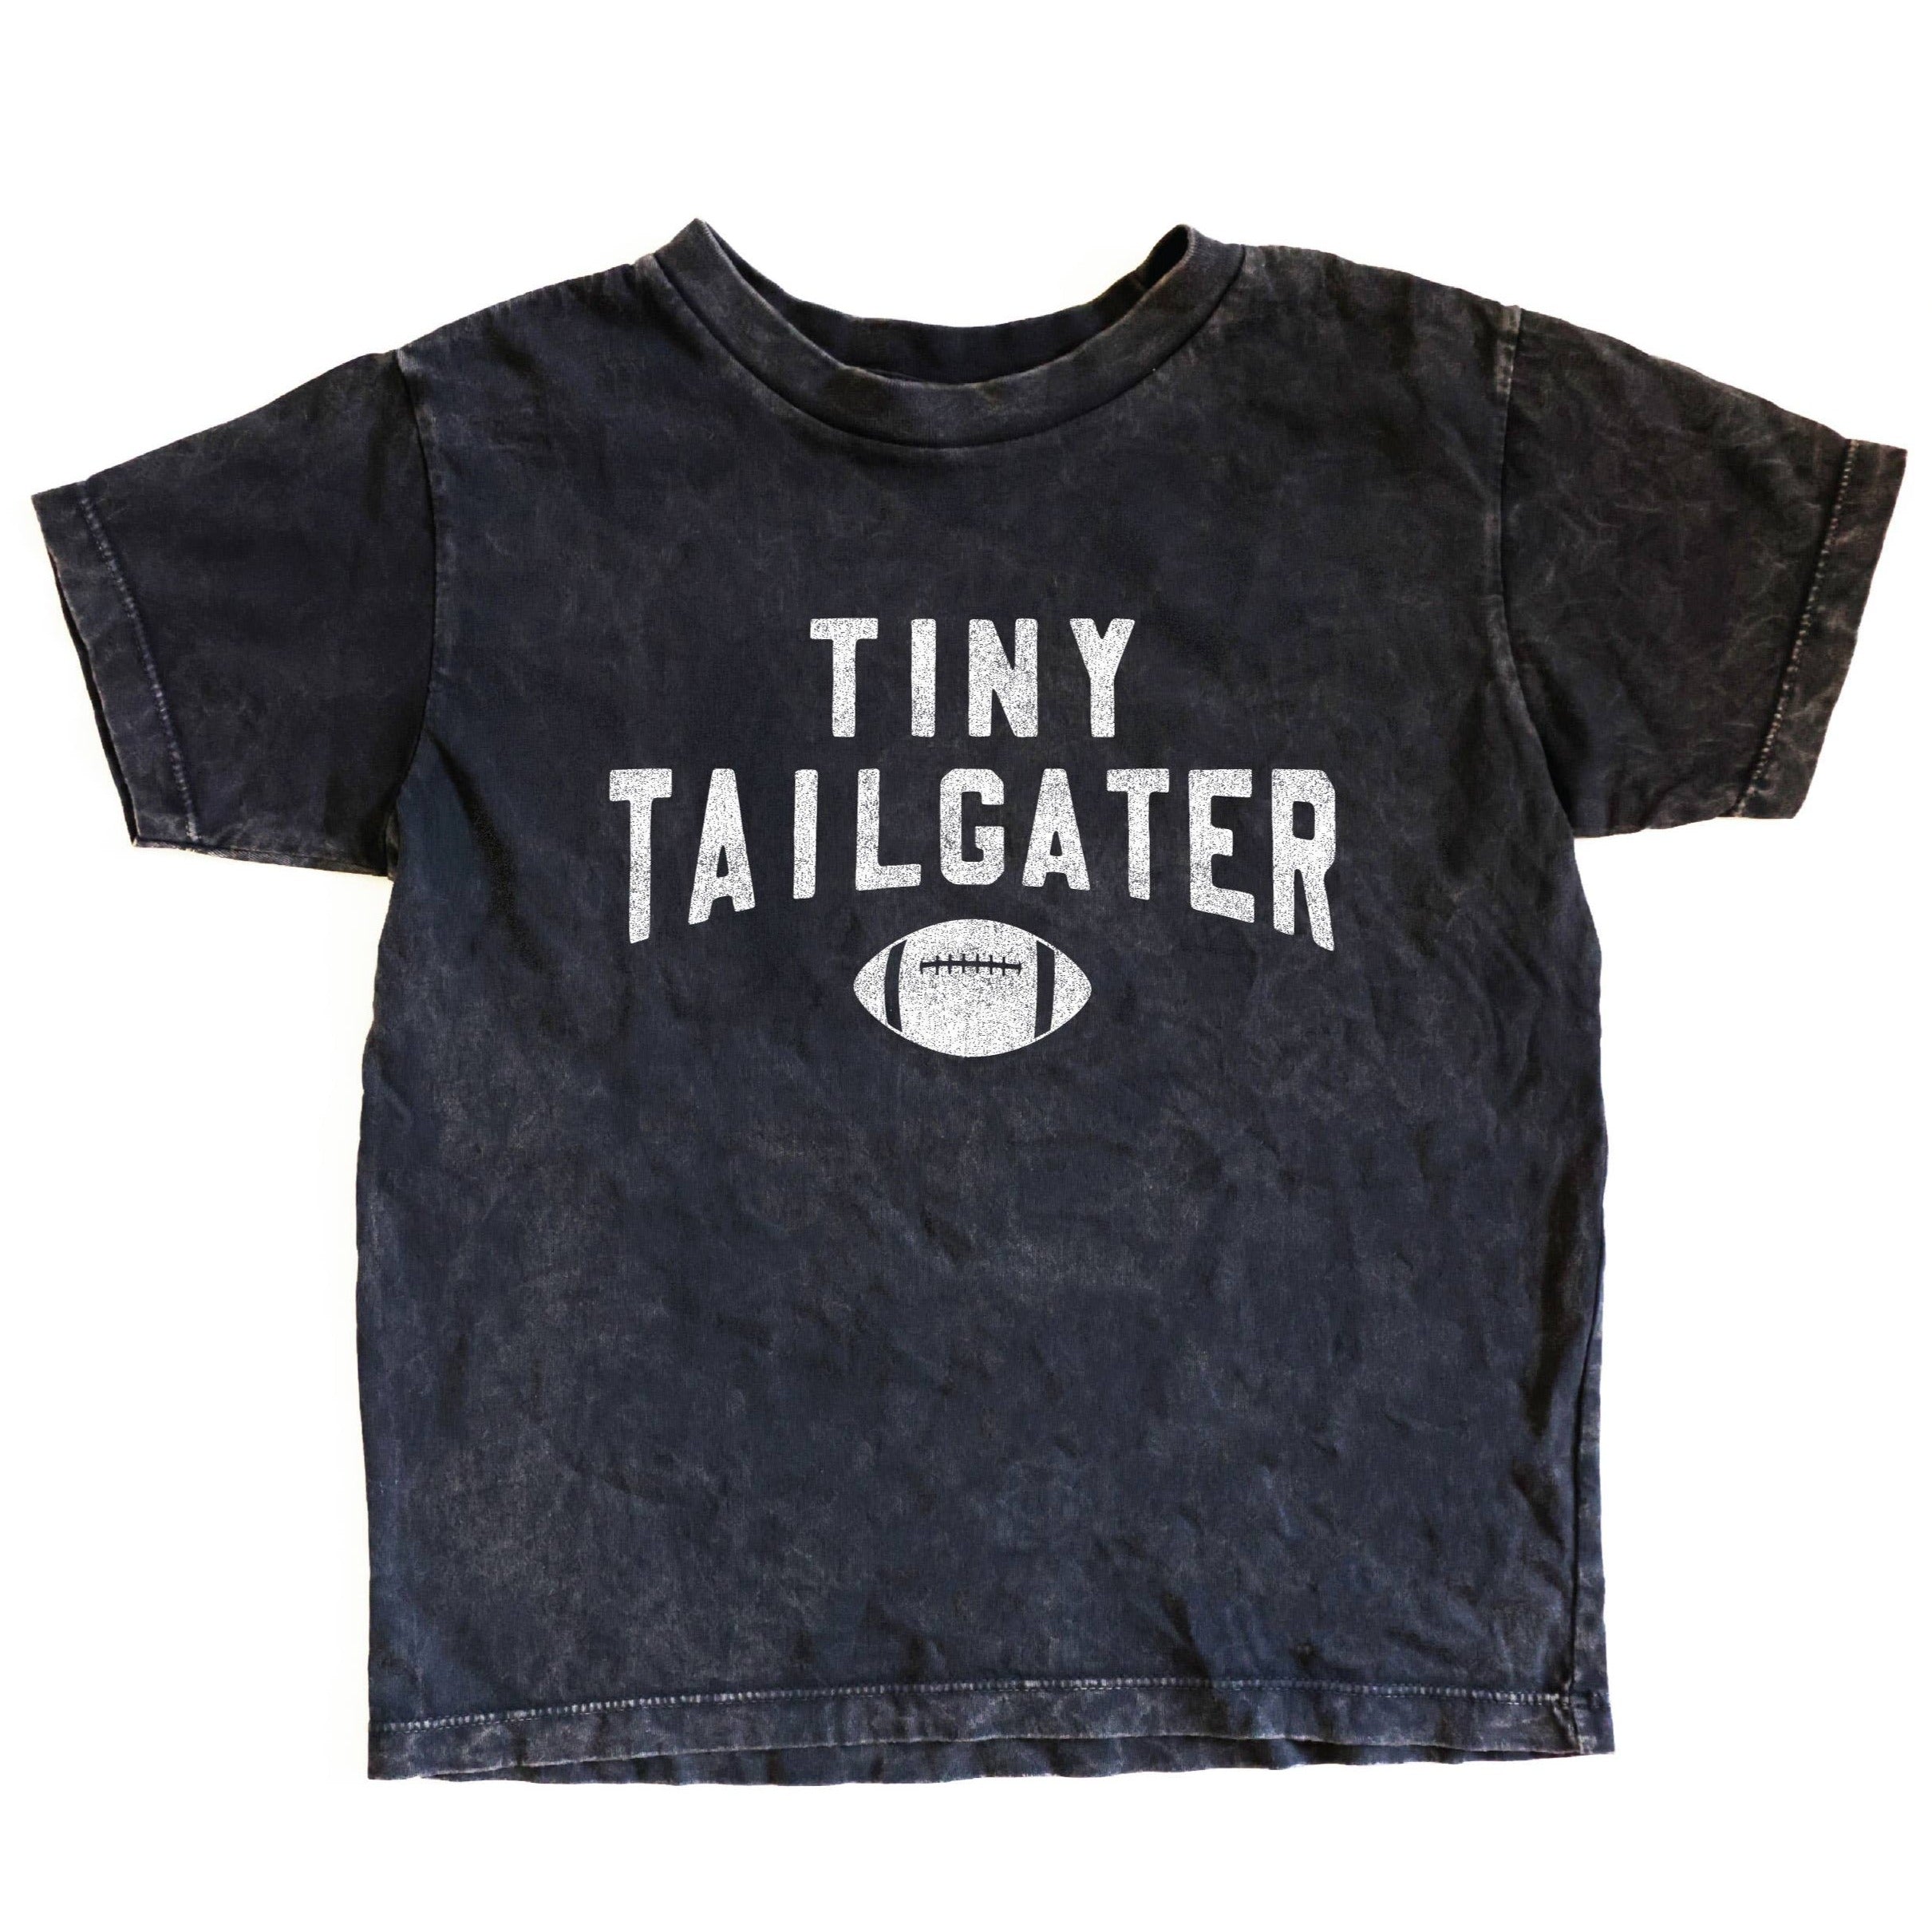 Tiny Tailgater Mineral Wash Tee - Mineral Black